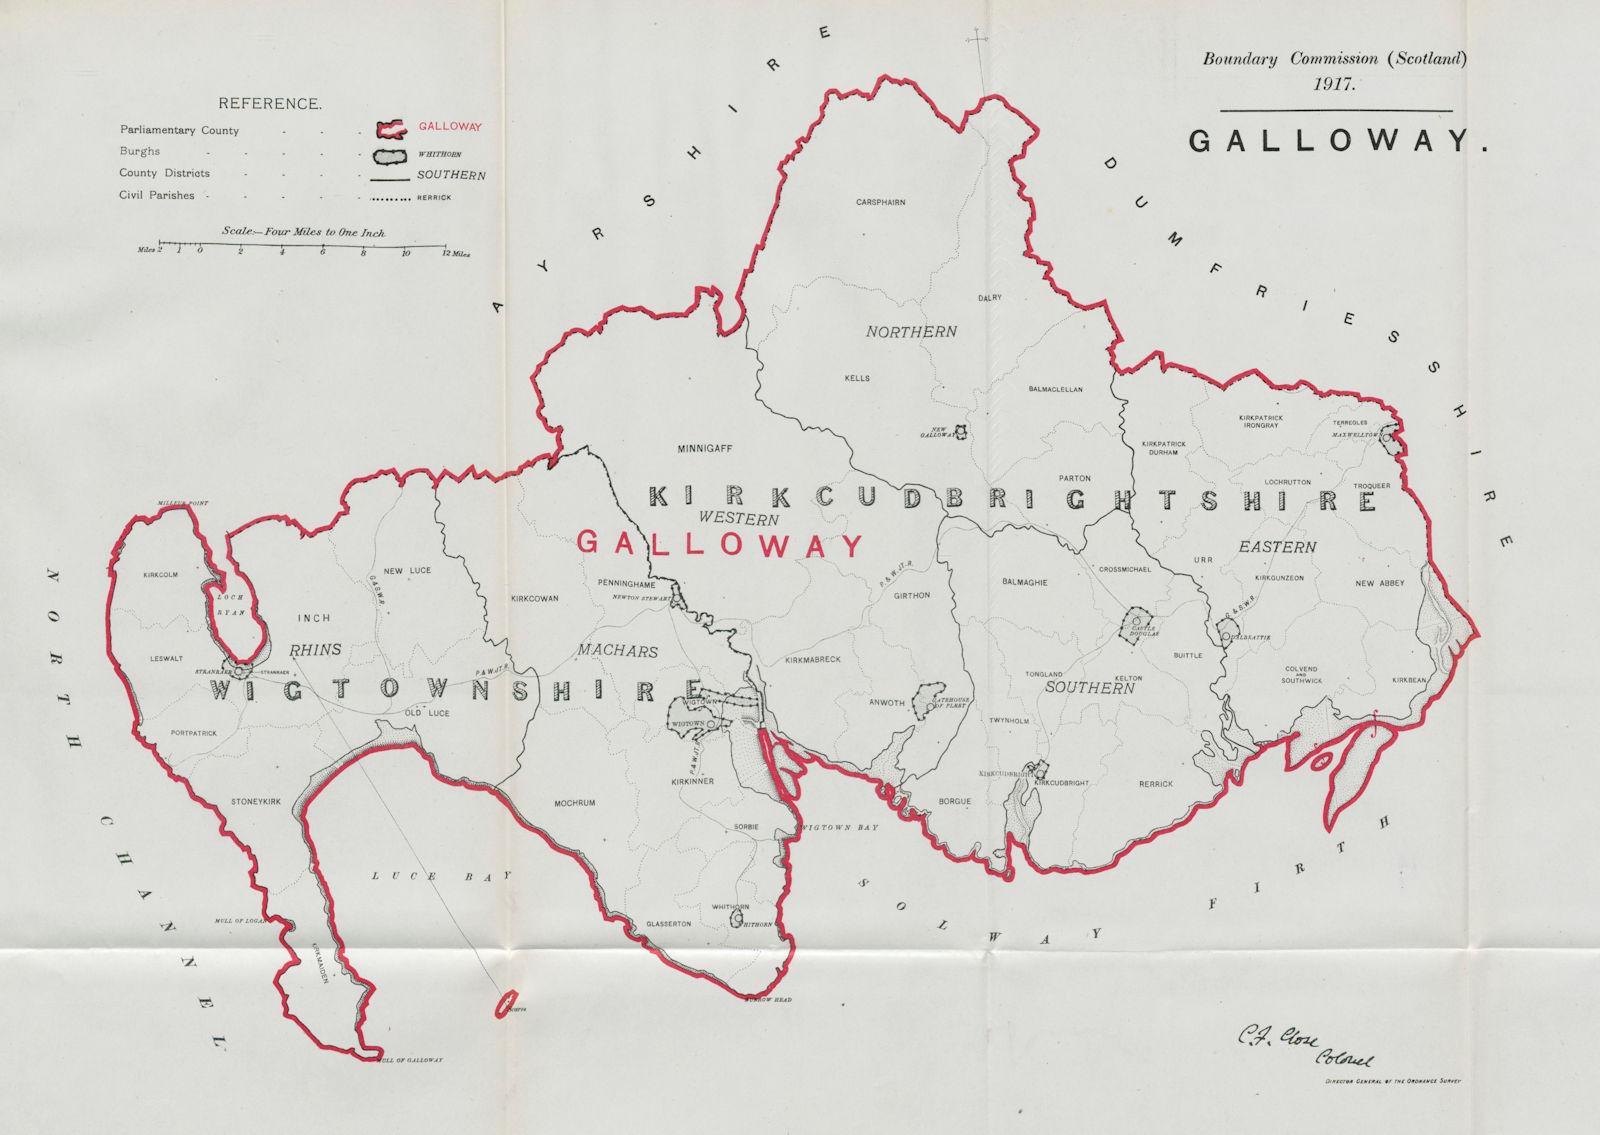 Galloway Parliamentary County. Scotland. BOUNDARY COMMISSION. Close 1917 map